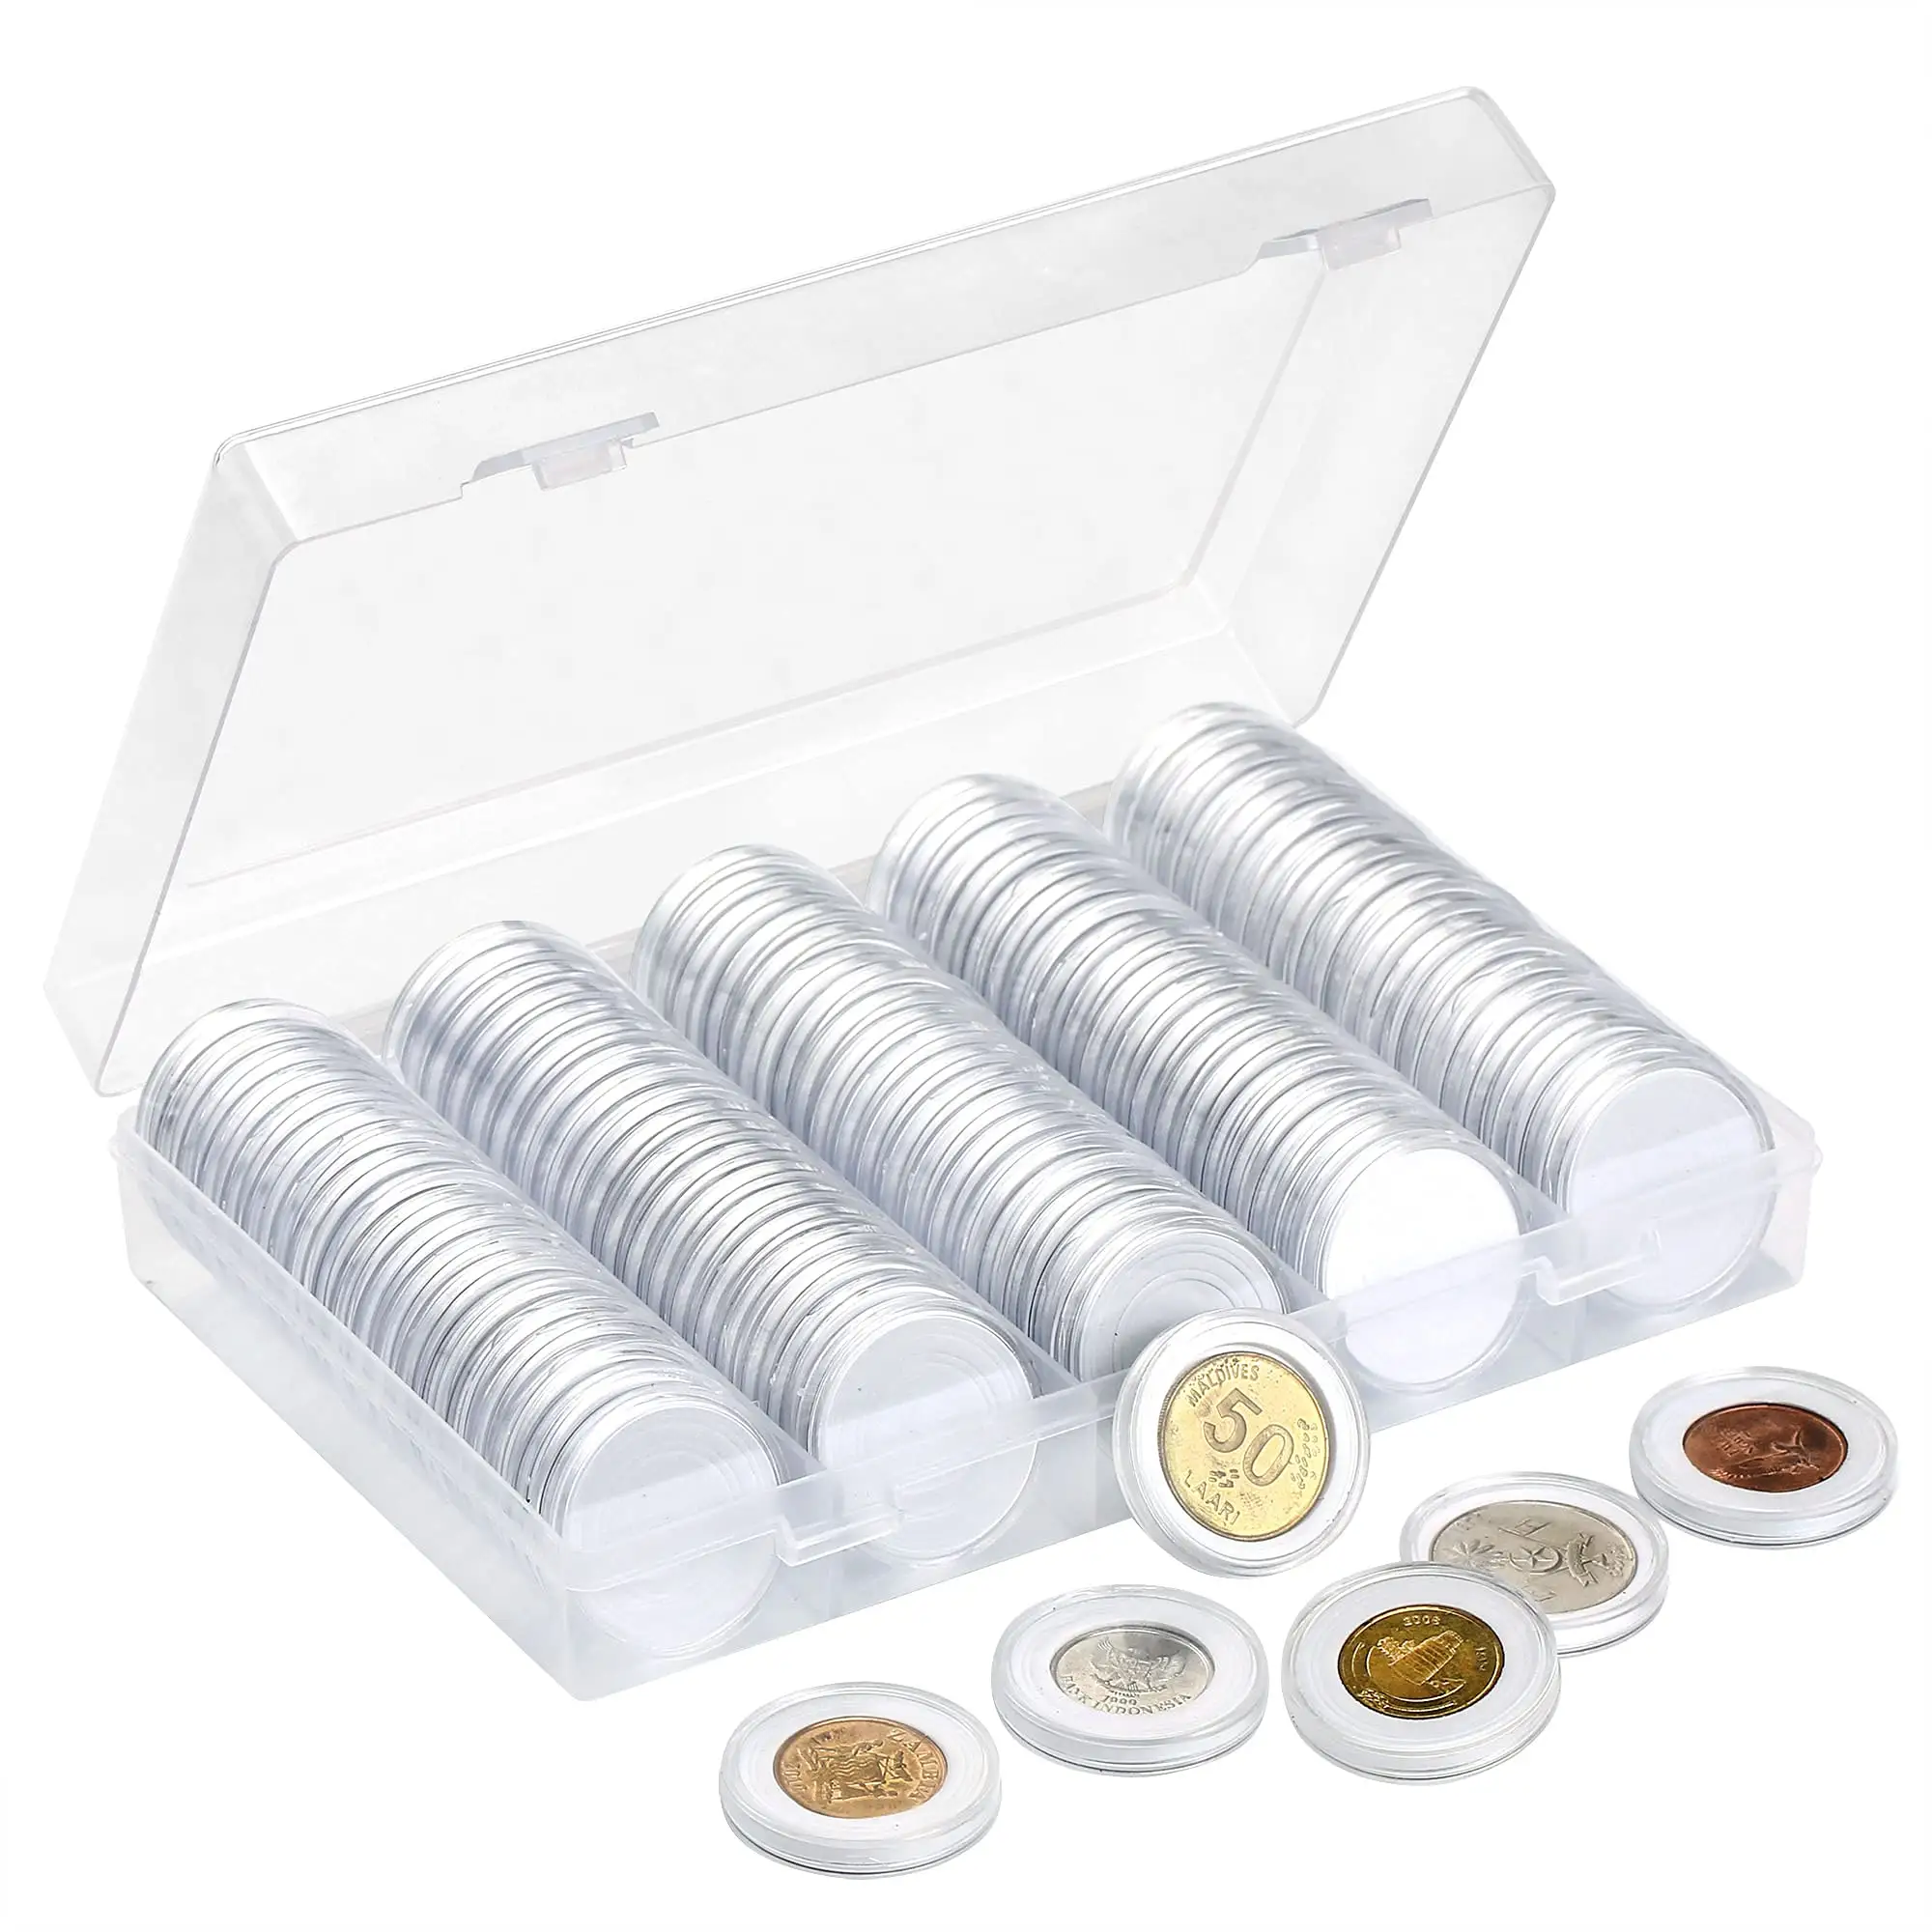 High Quality White Foam Pvc Free 17 19 22 26 28 32 MM Plastic Coin Collection Storage Capsules Holder Hard Case For Coins